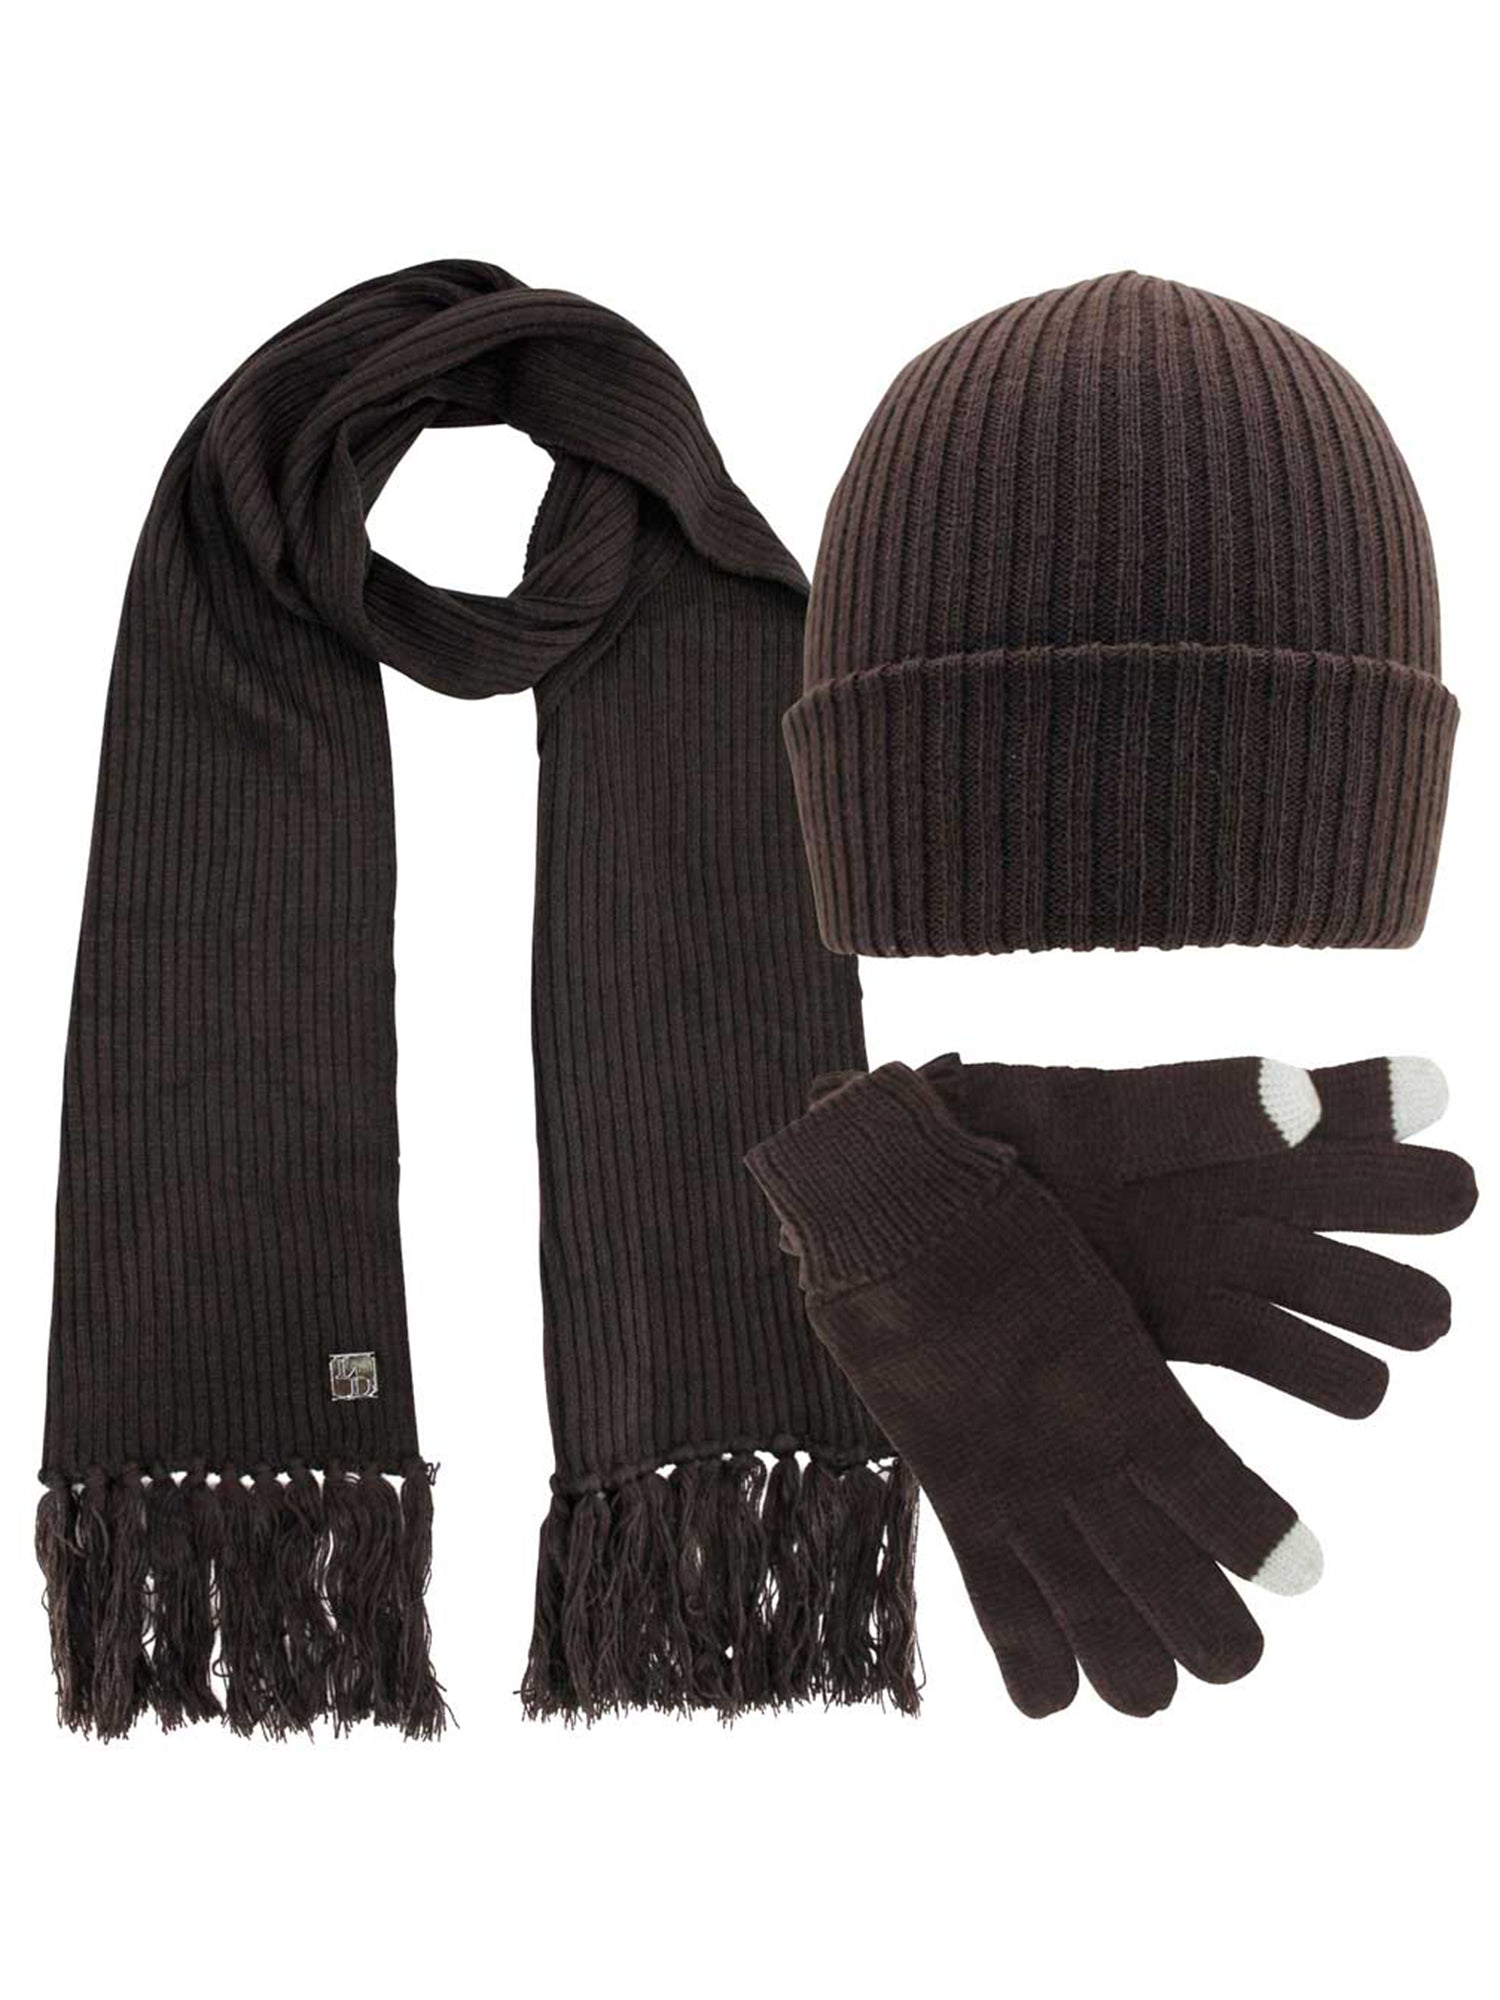 Hat and Scarf Set 